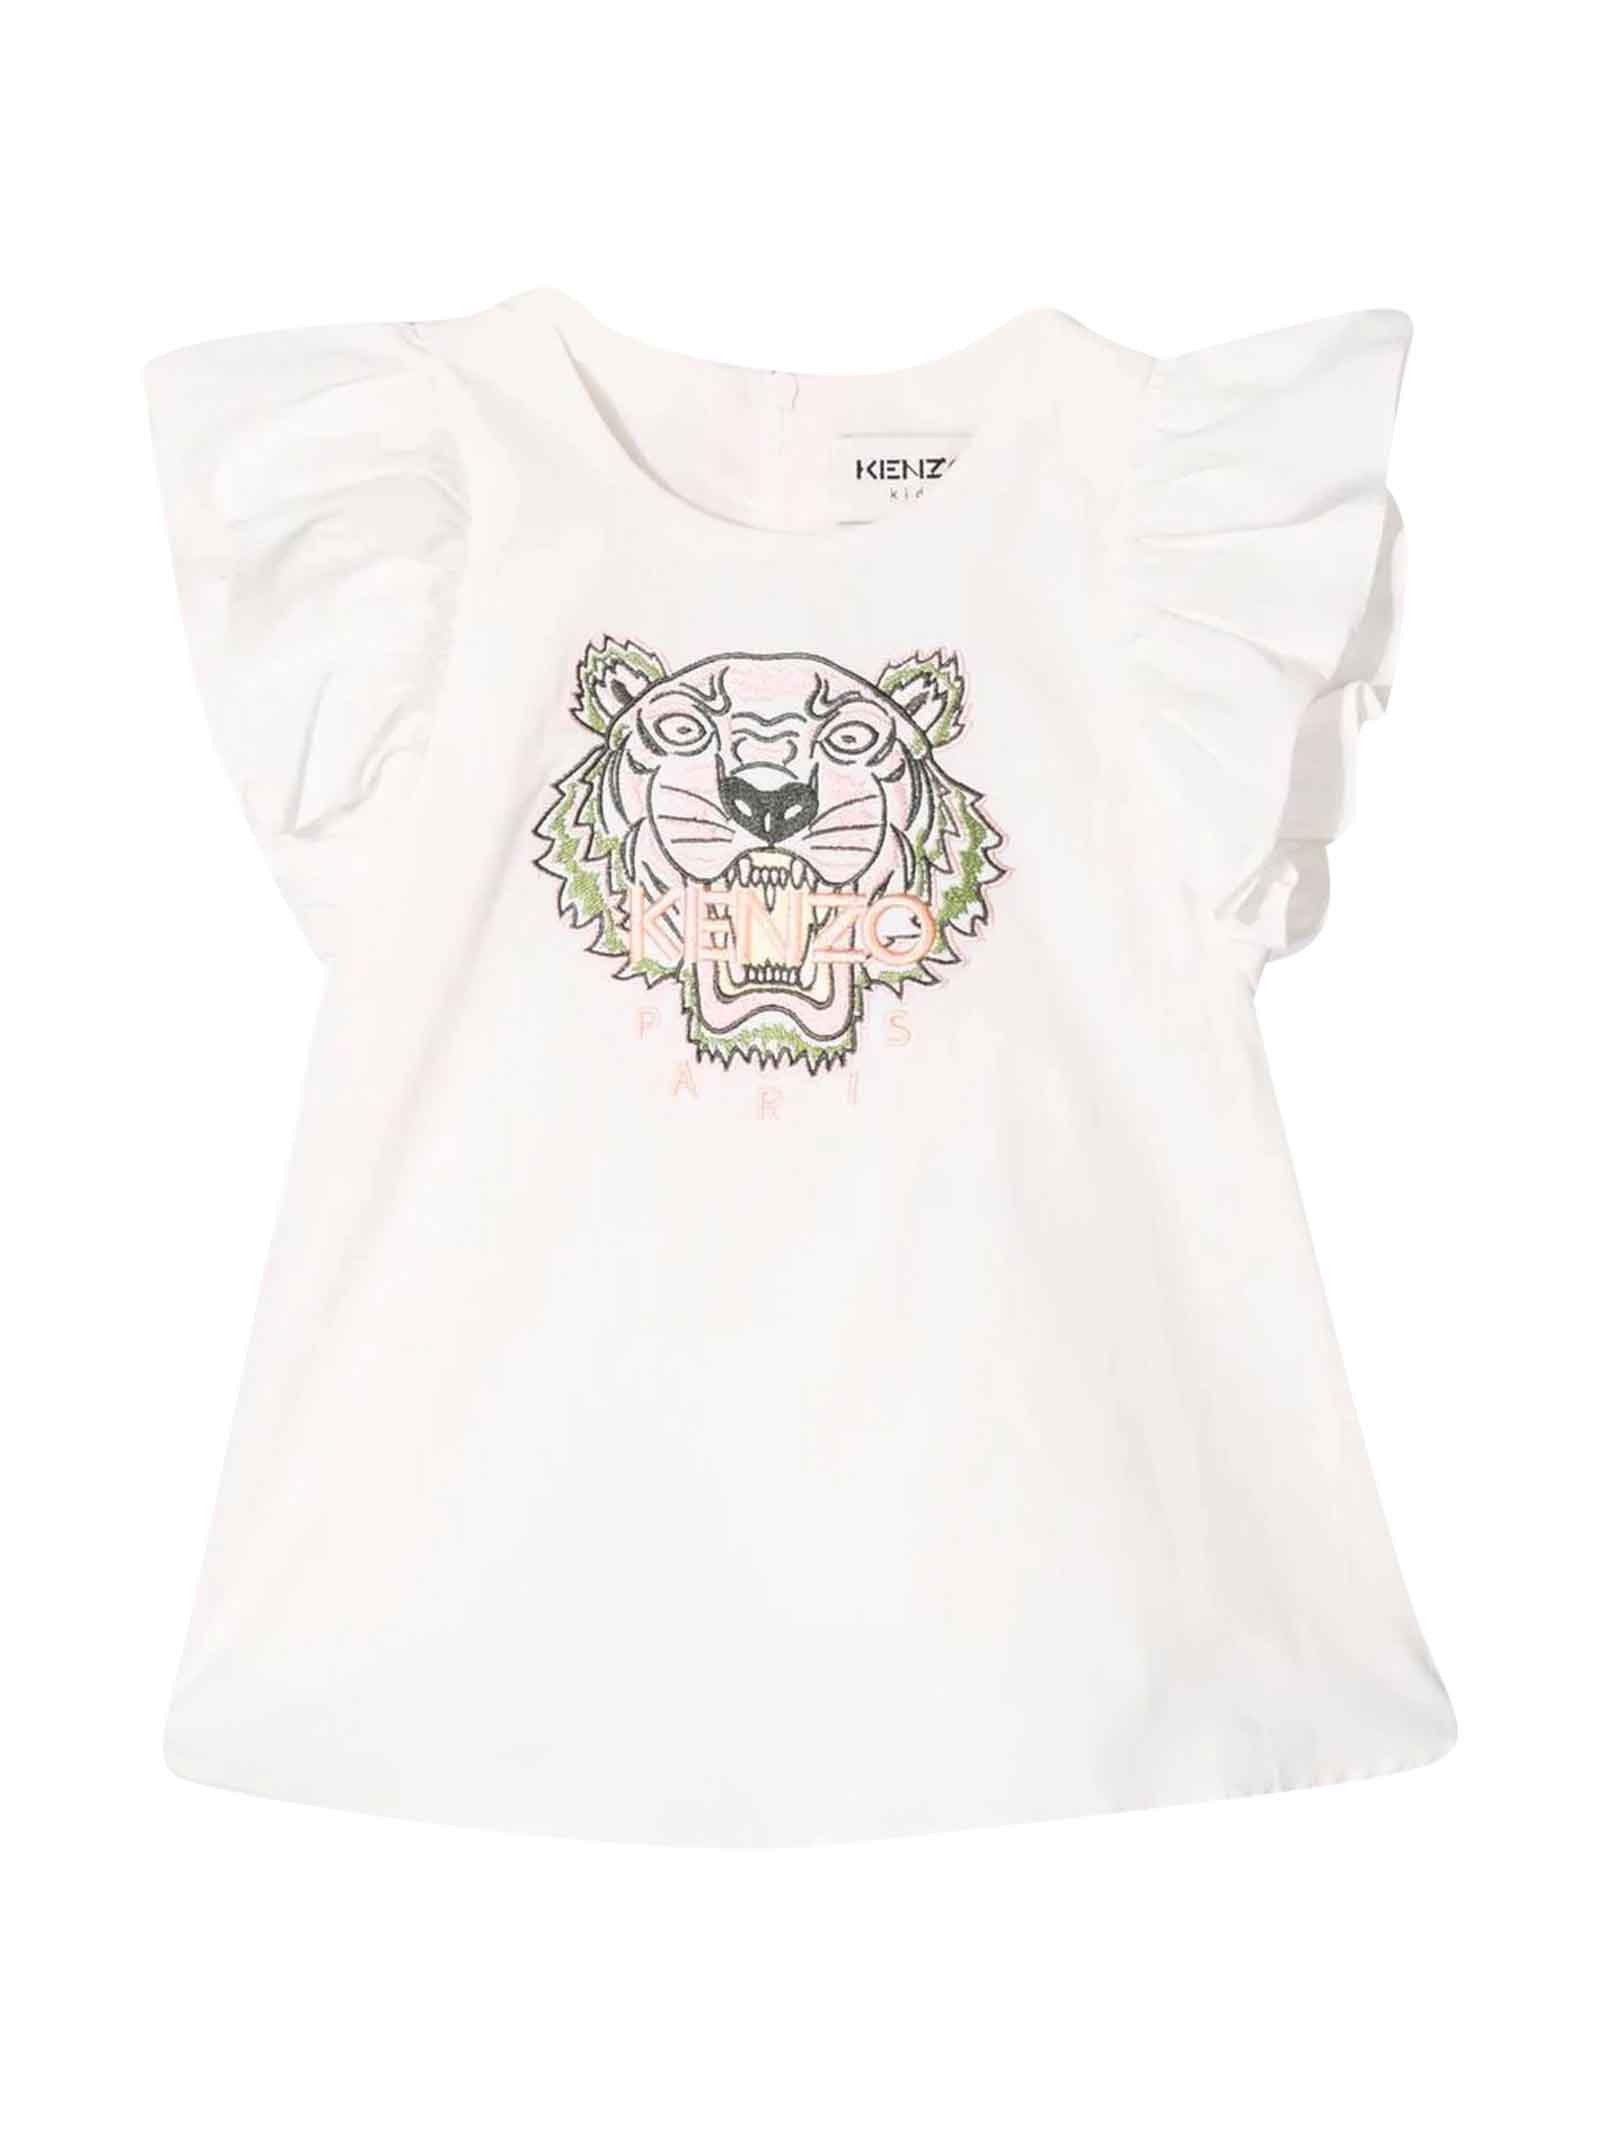 Kenzo Kids White Baby Girl Dress, T-shirt Model With Embroidery Characteristic Tiger Head Motif, Ruffle Detail, Round Neckline, Back Zip Closure, Short Sleeves